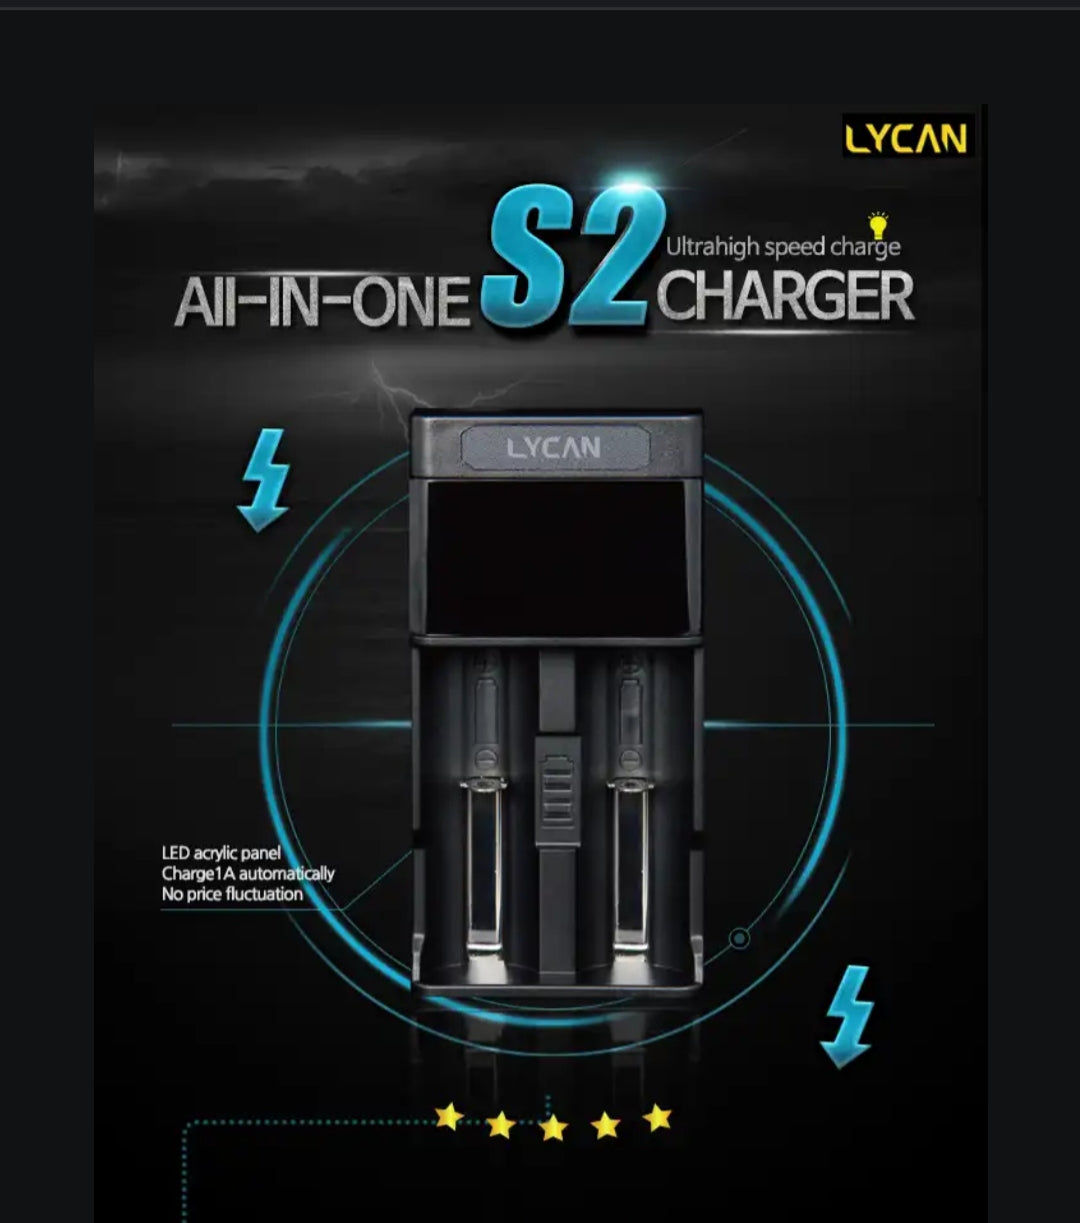 Lycan Charger S2